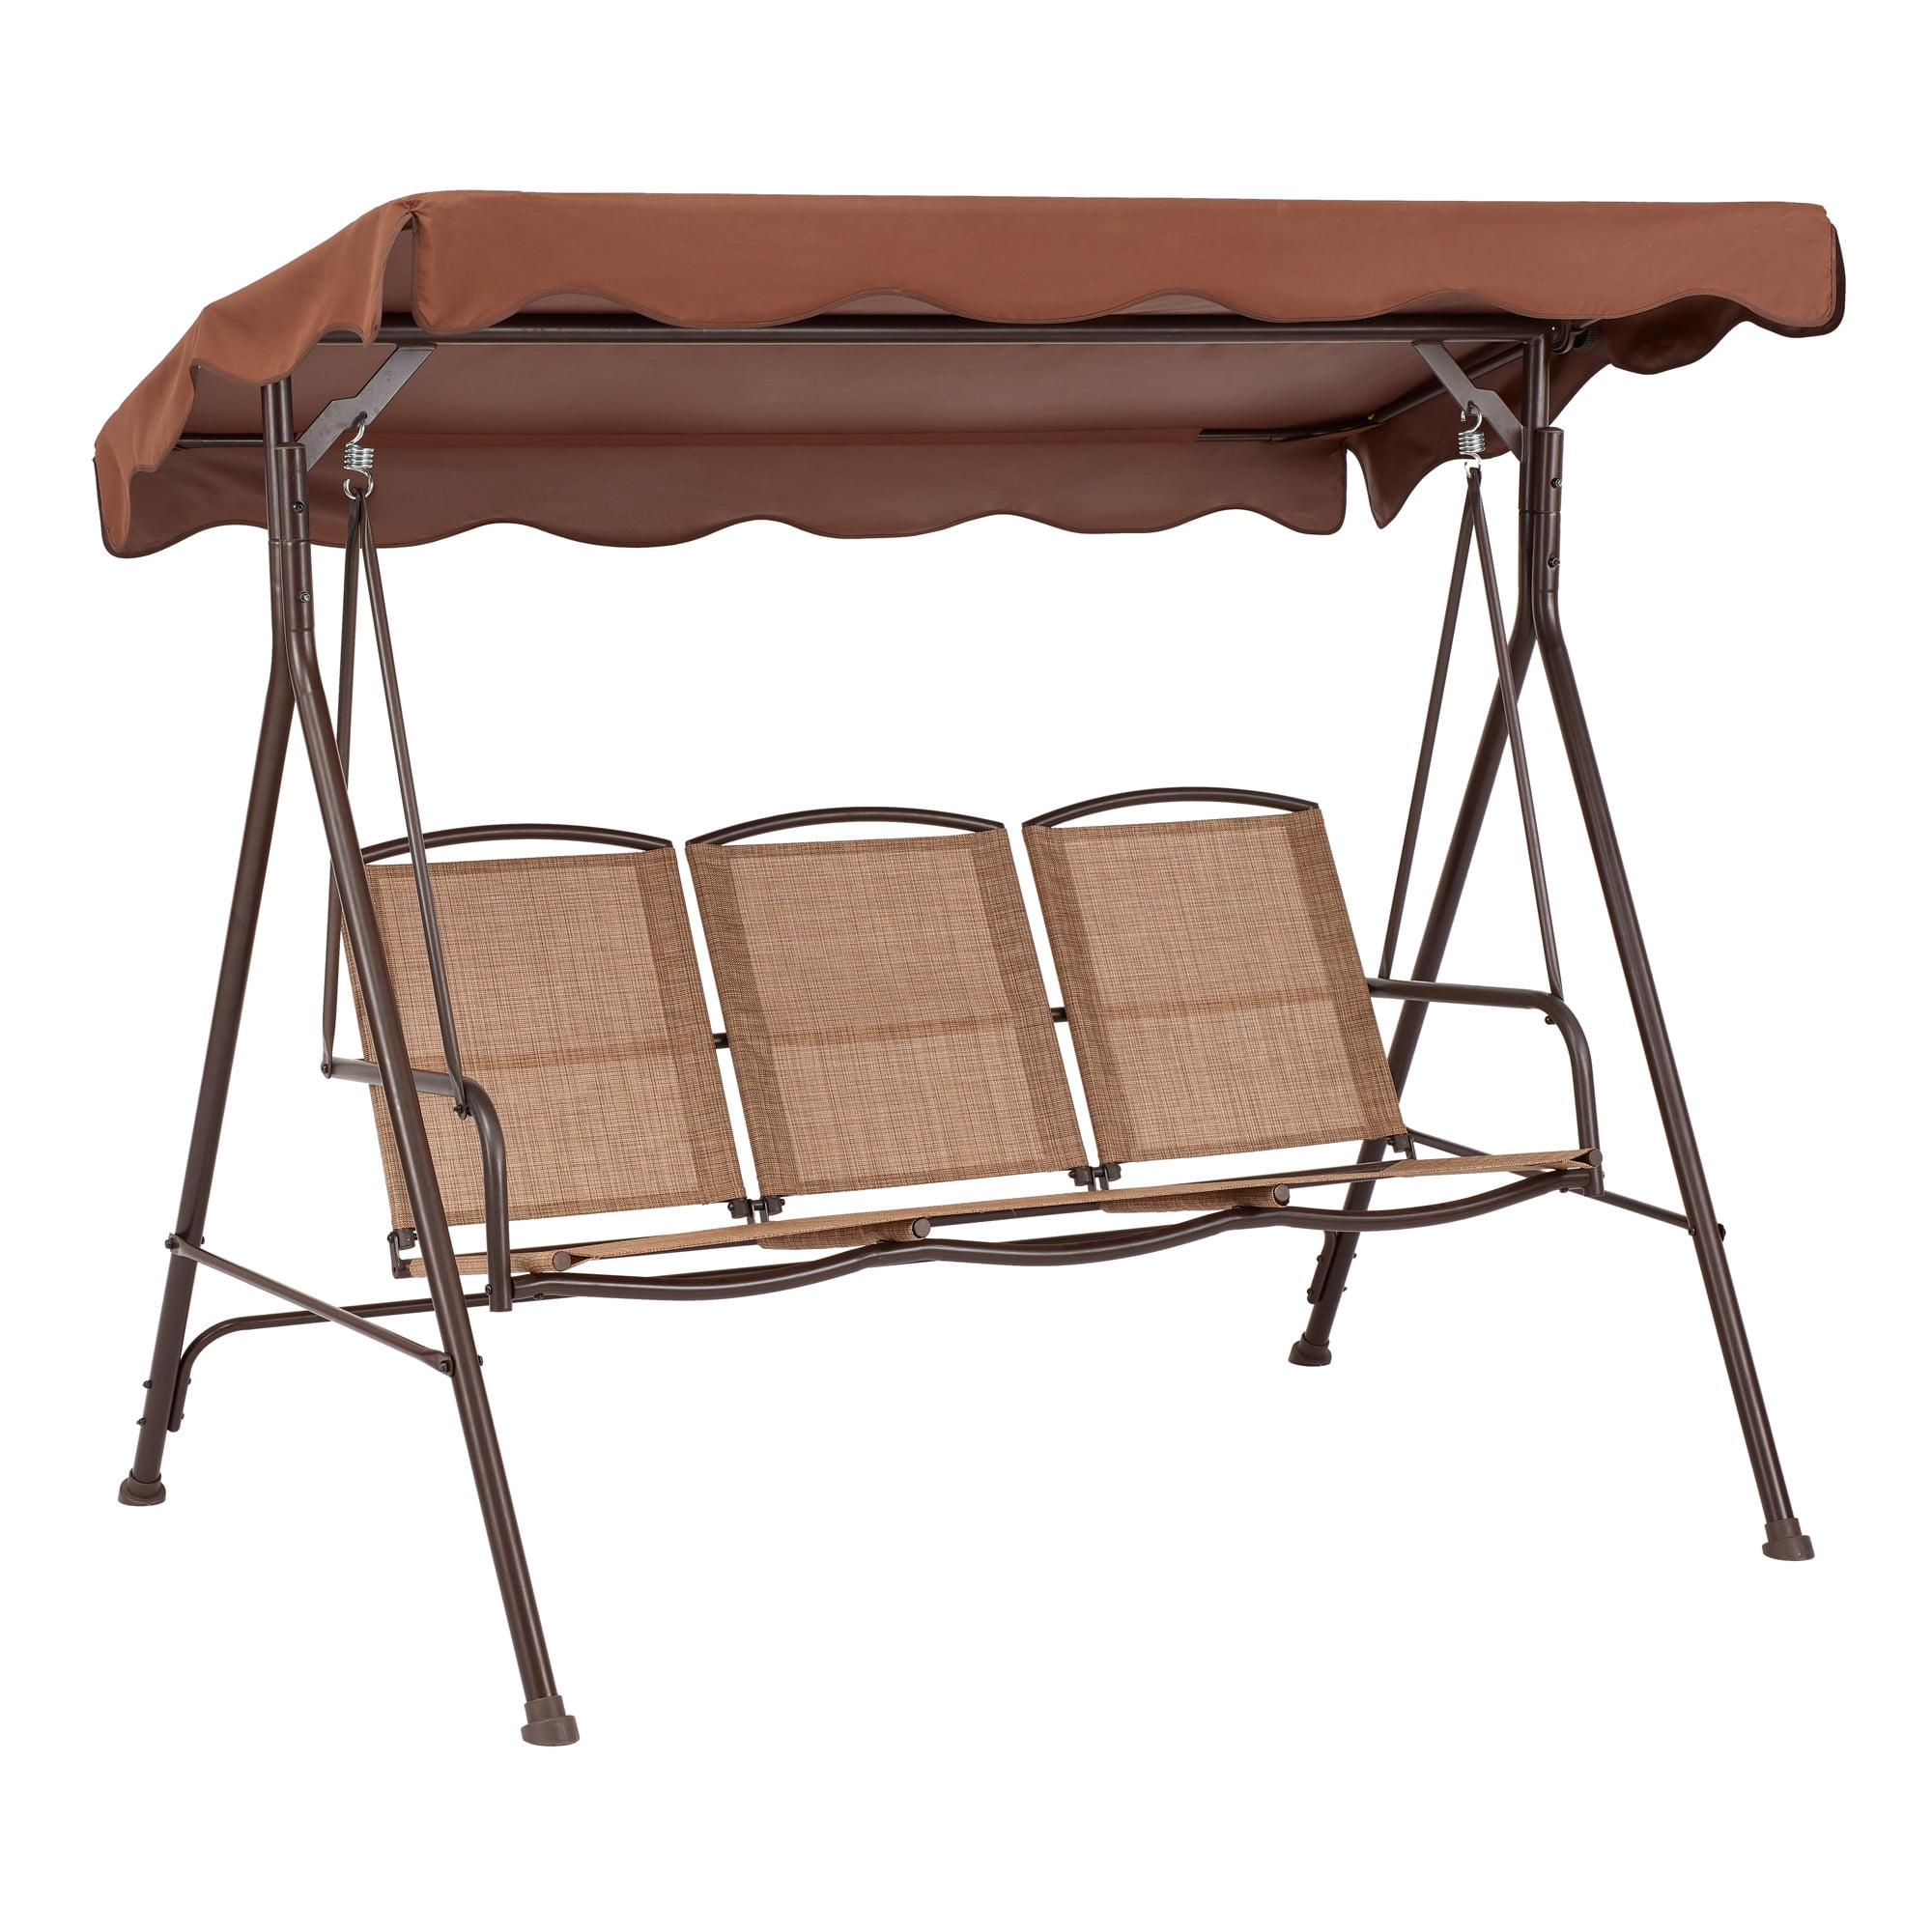 Mainstays 3-Person Sand Dune Canopy Steel Porch Swing $98 + Free Shipping